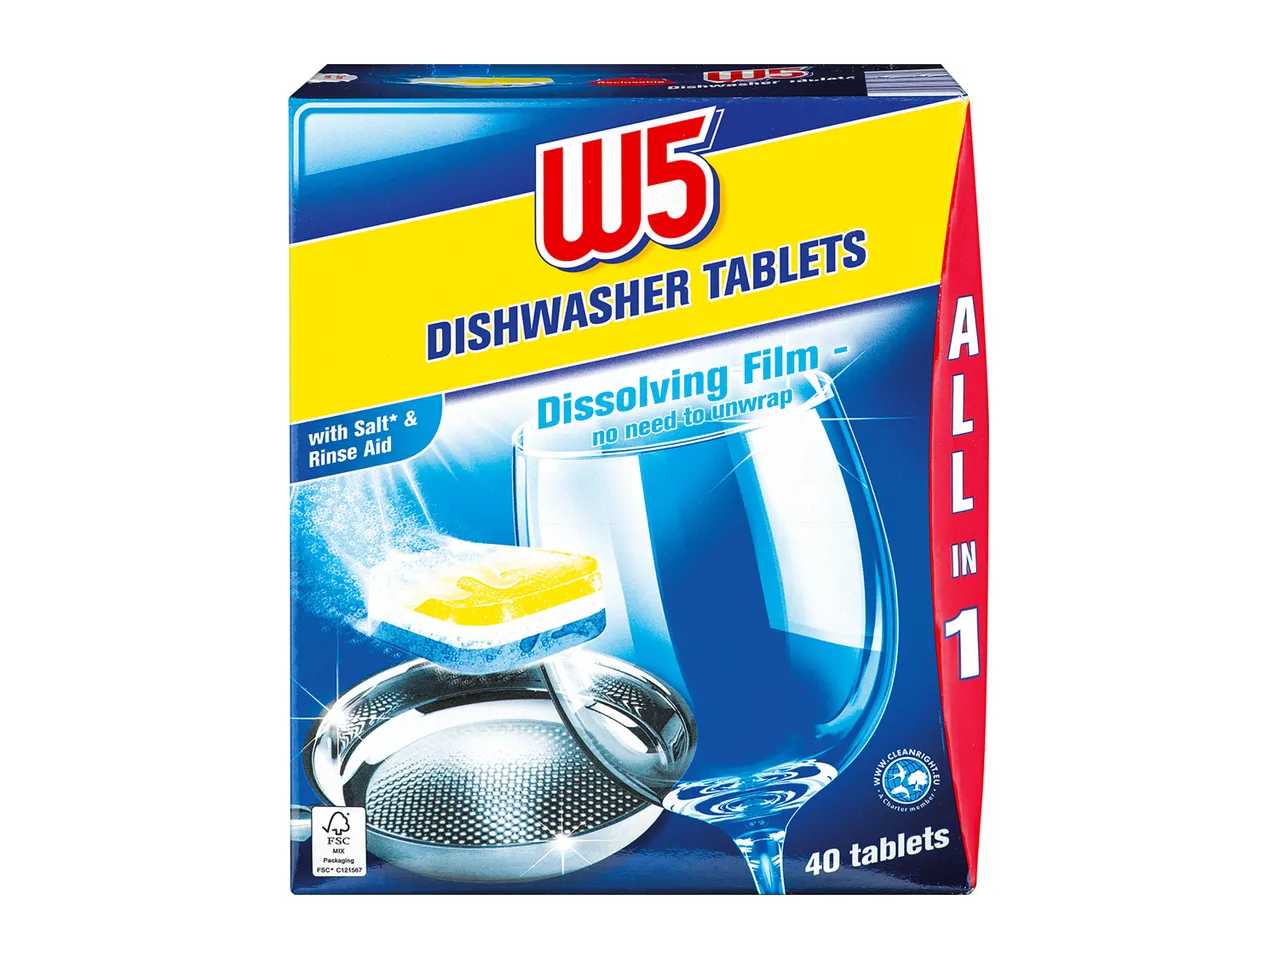 Go to full screen view: W5 Dishwasher Tablets Original - Image 1